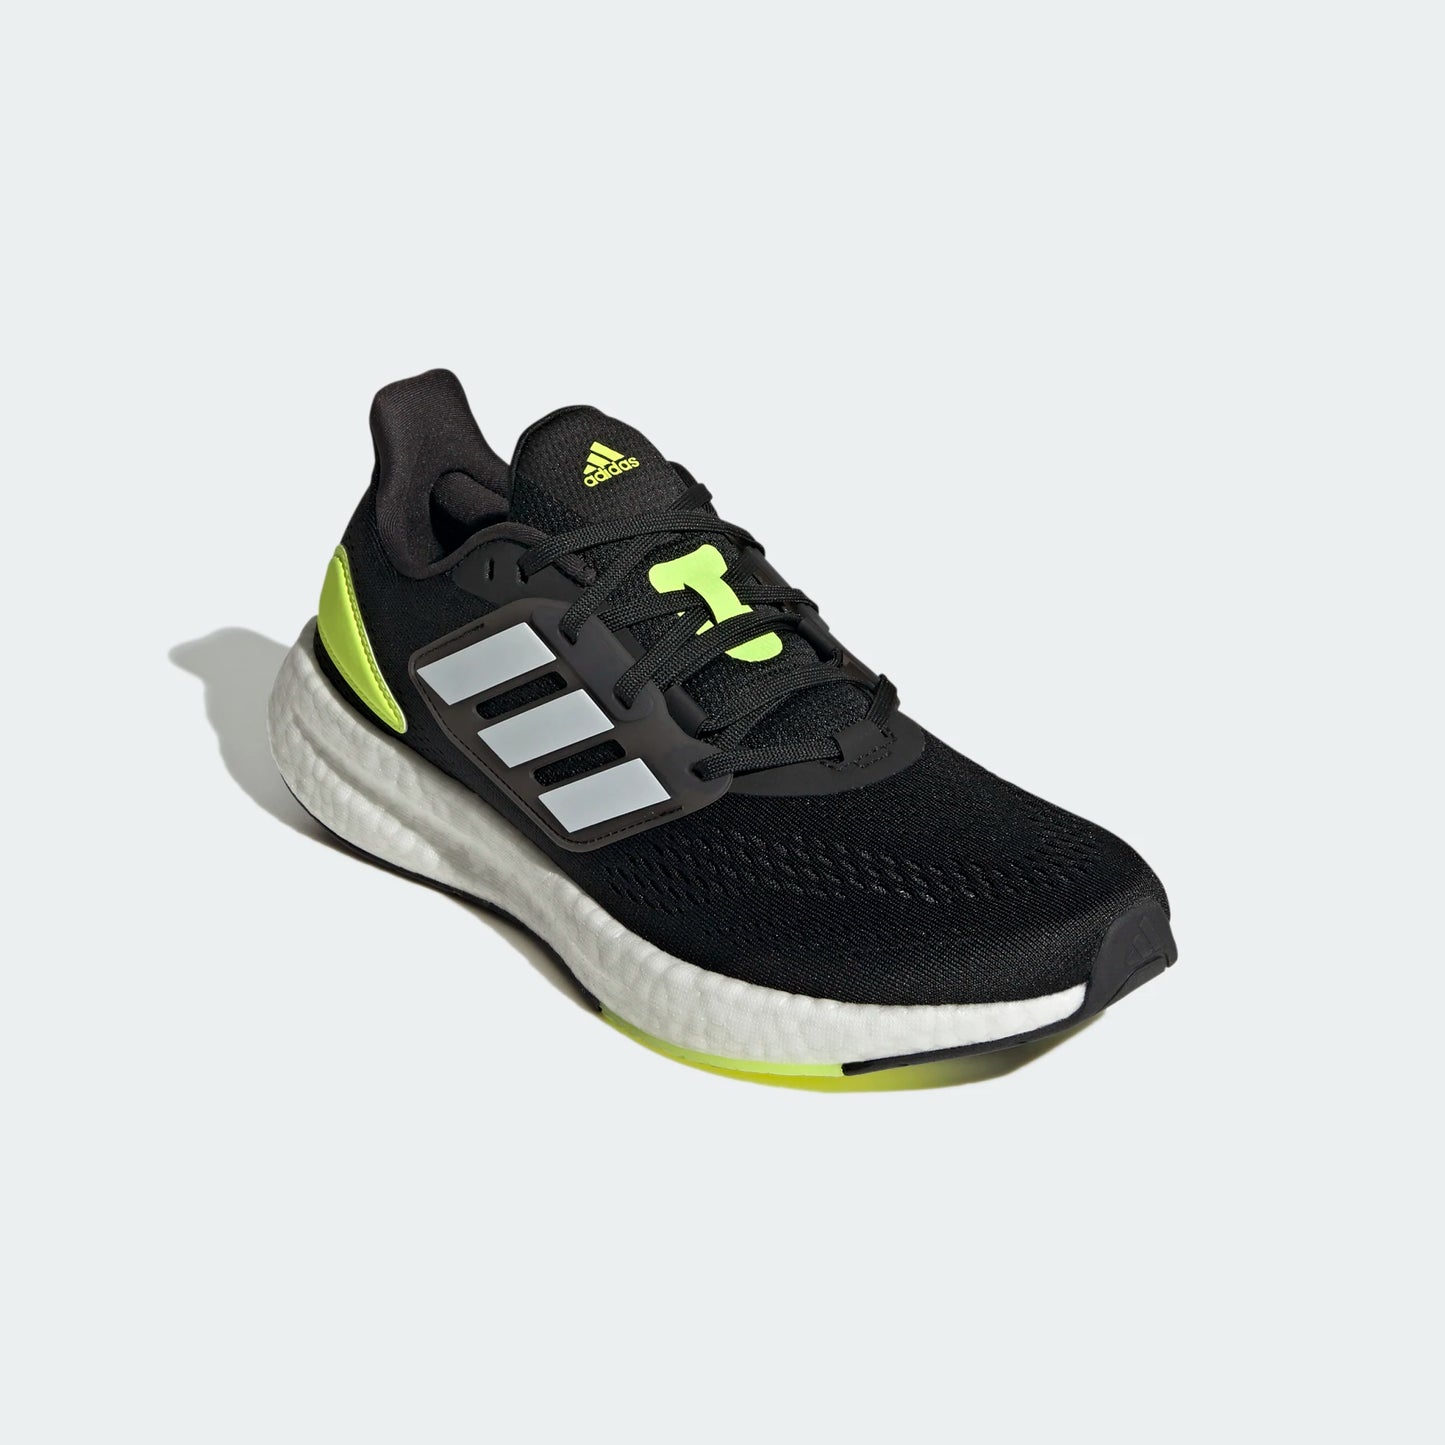 adidas PURE BOOST 22 Shoes | Men's